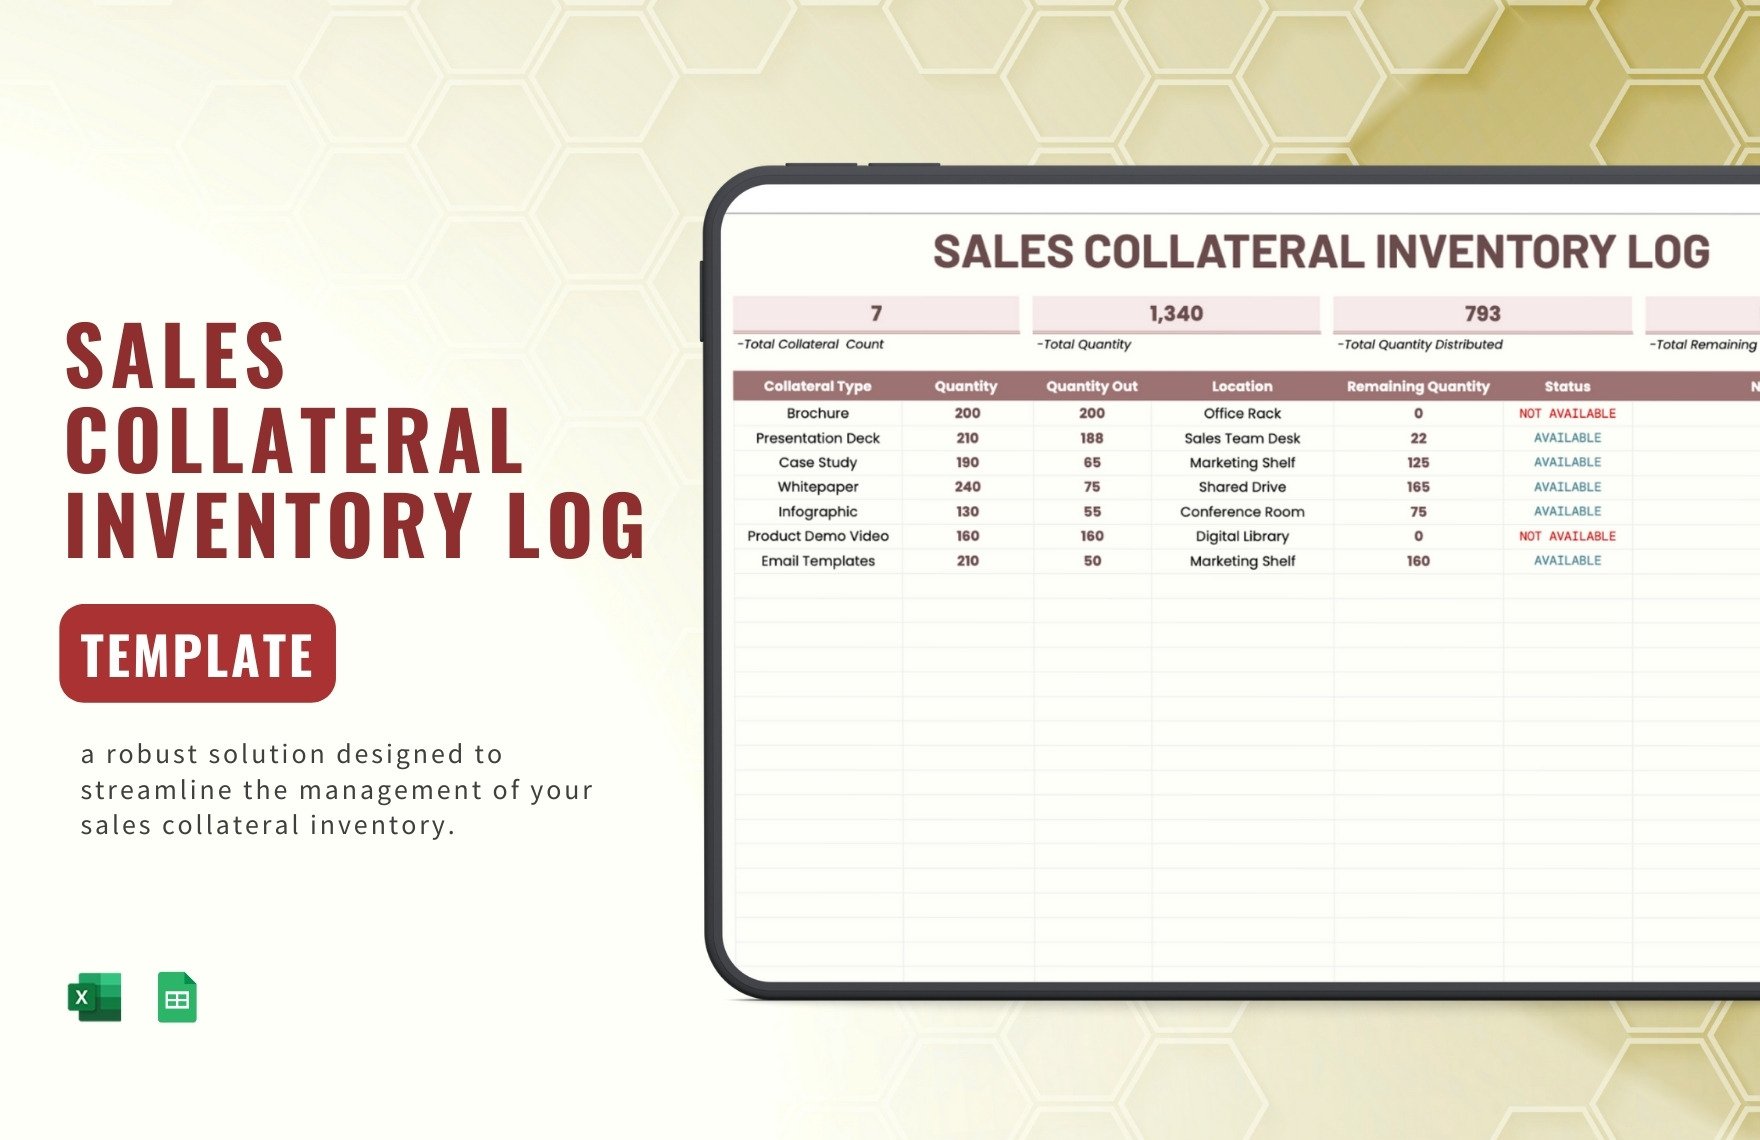 Sales Collateral Inventory Log Template